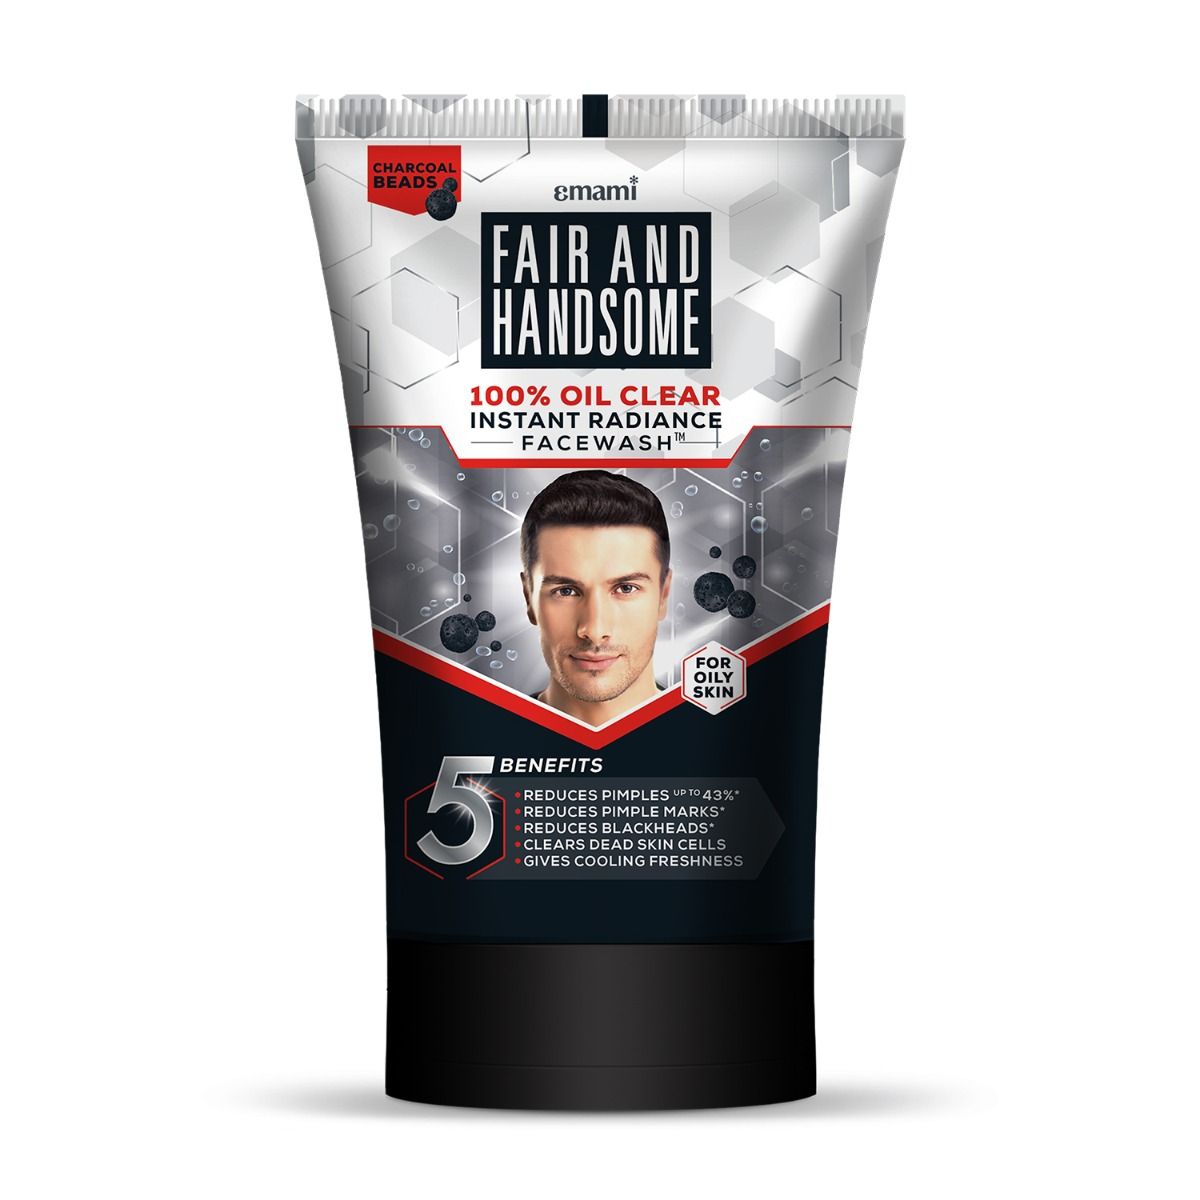 Fair and Handsome 100% Oil Clear Instant Radiance Face Wash, 100 gm, Pack of 1 